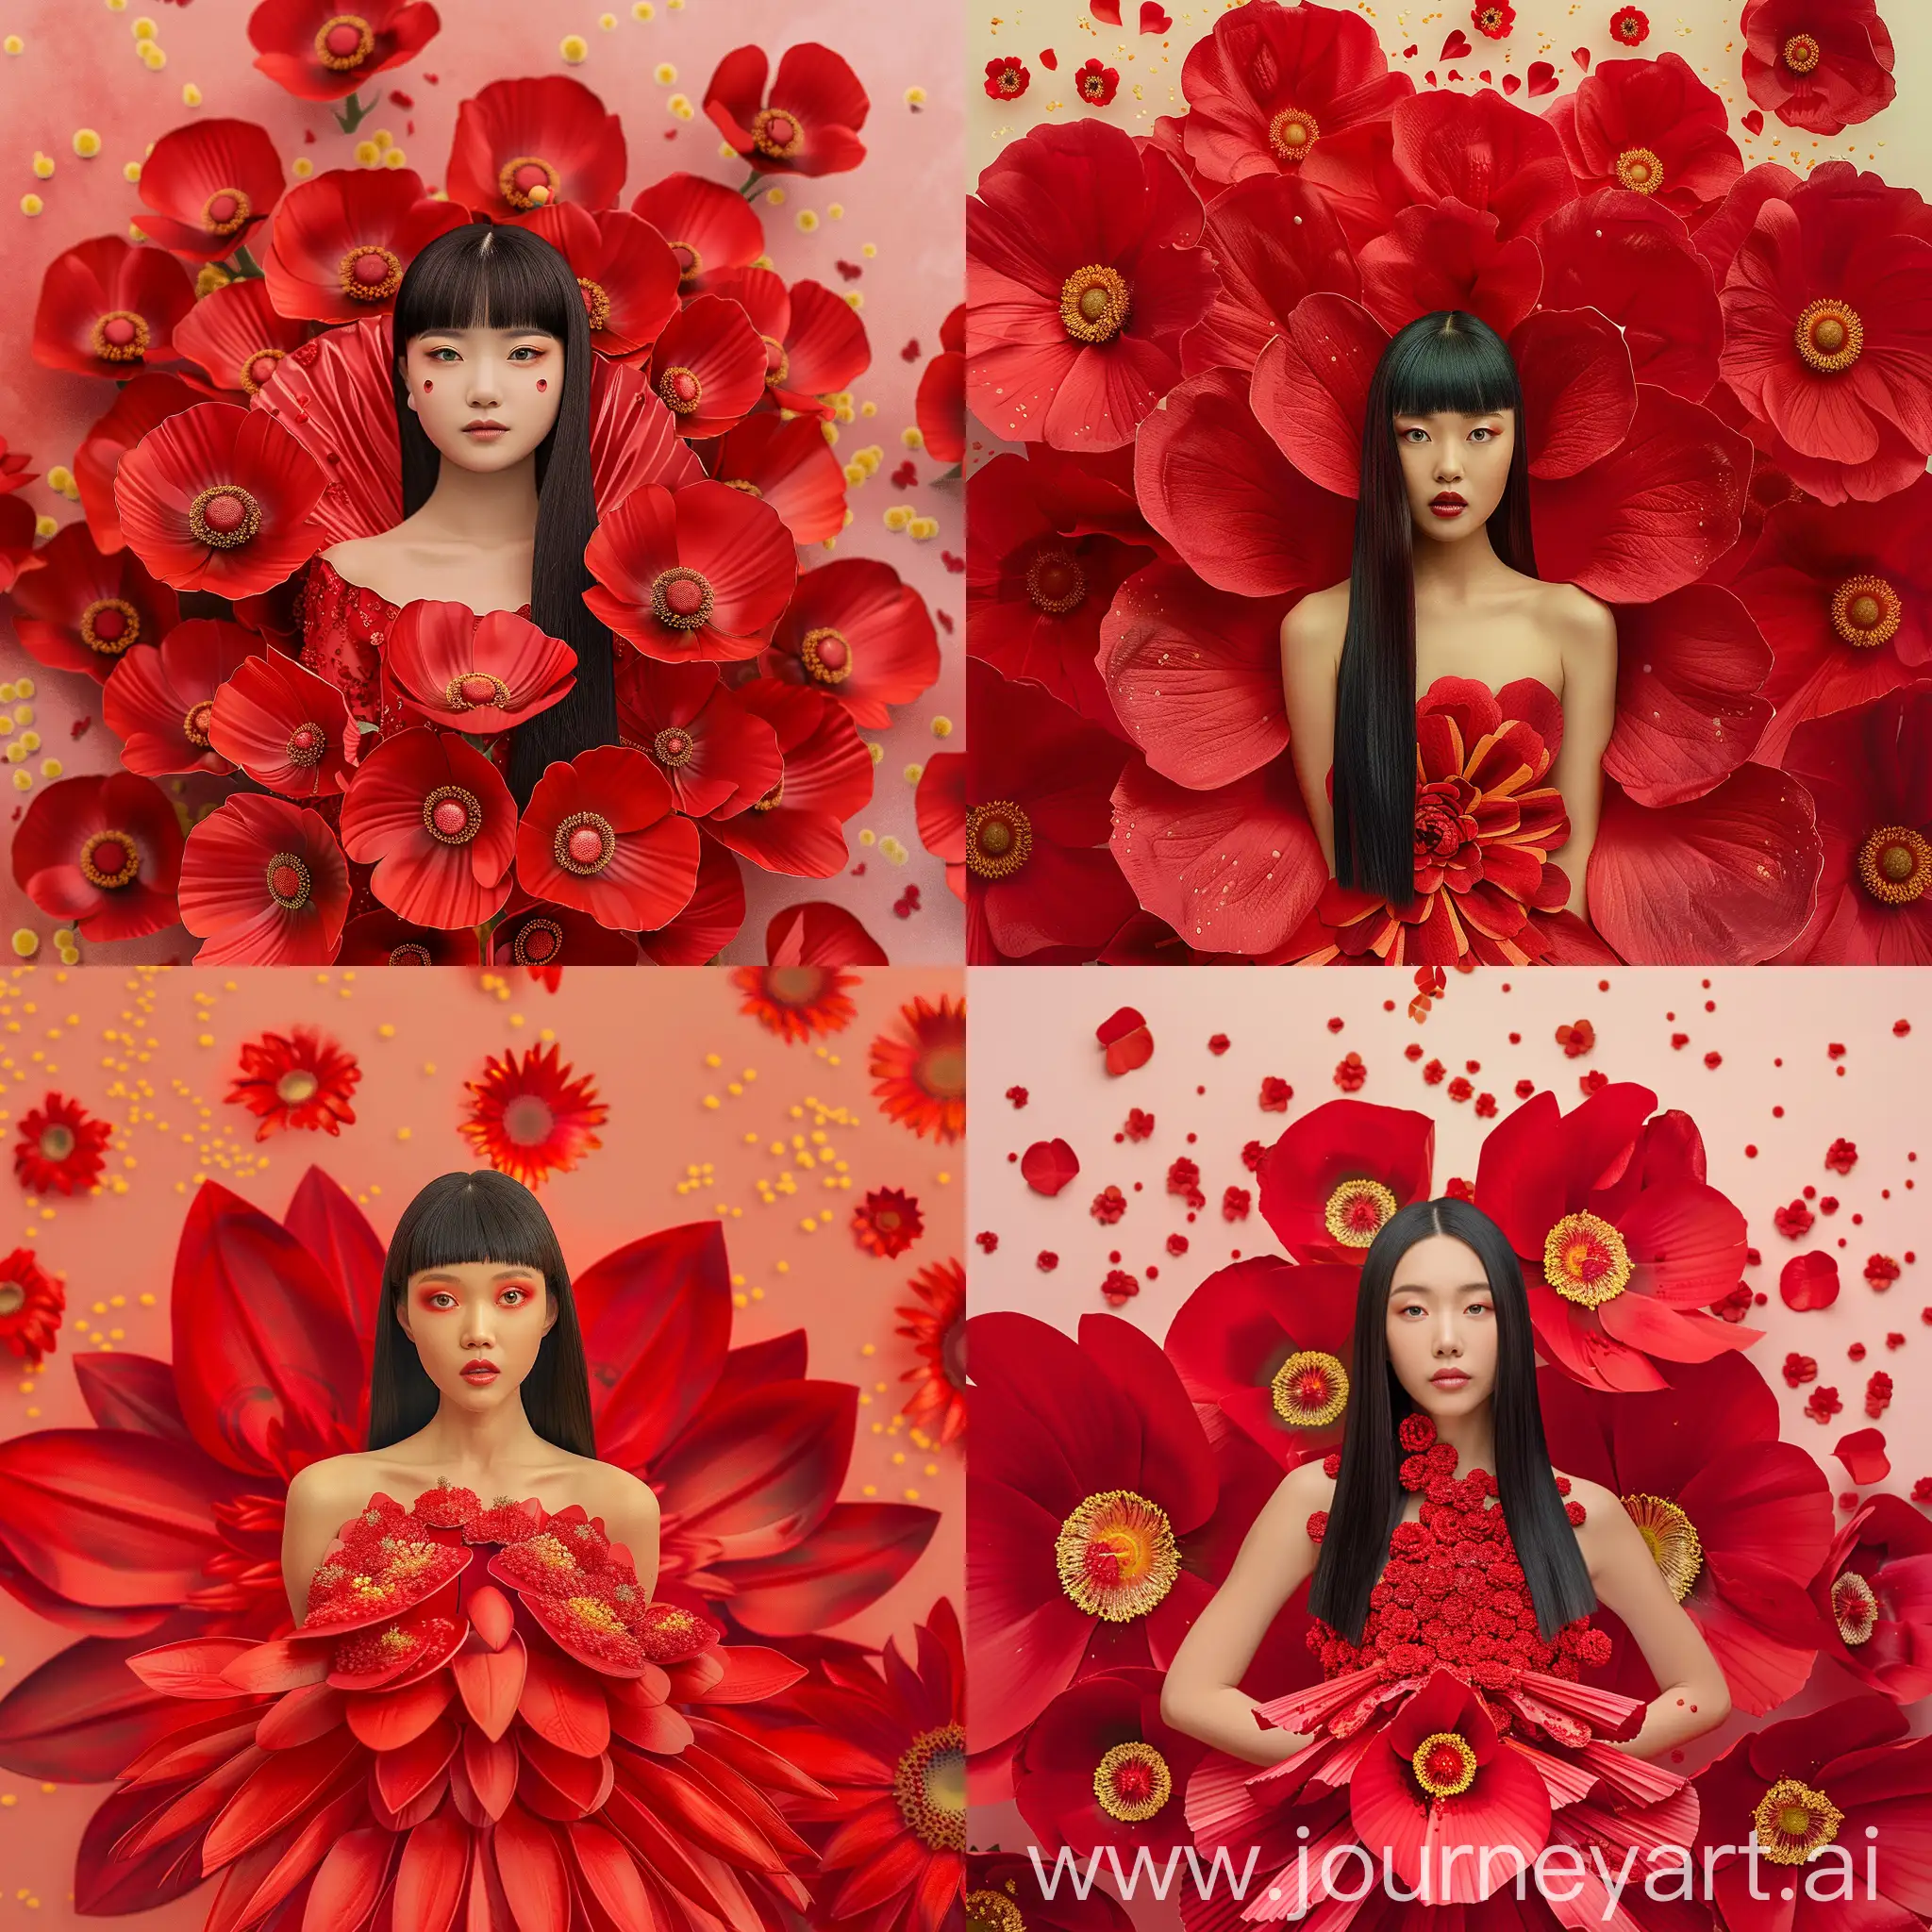 A beautiful asian bride with straight black hair wearing a red flower petal shaped dress, standing on a light red background, with many Red flowers of the dead with yellow pollen behind her